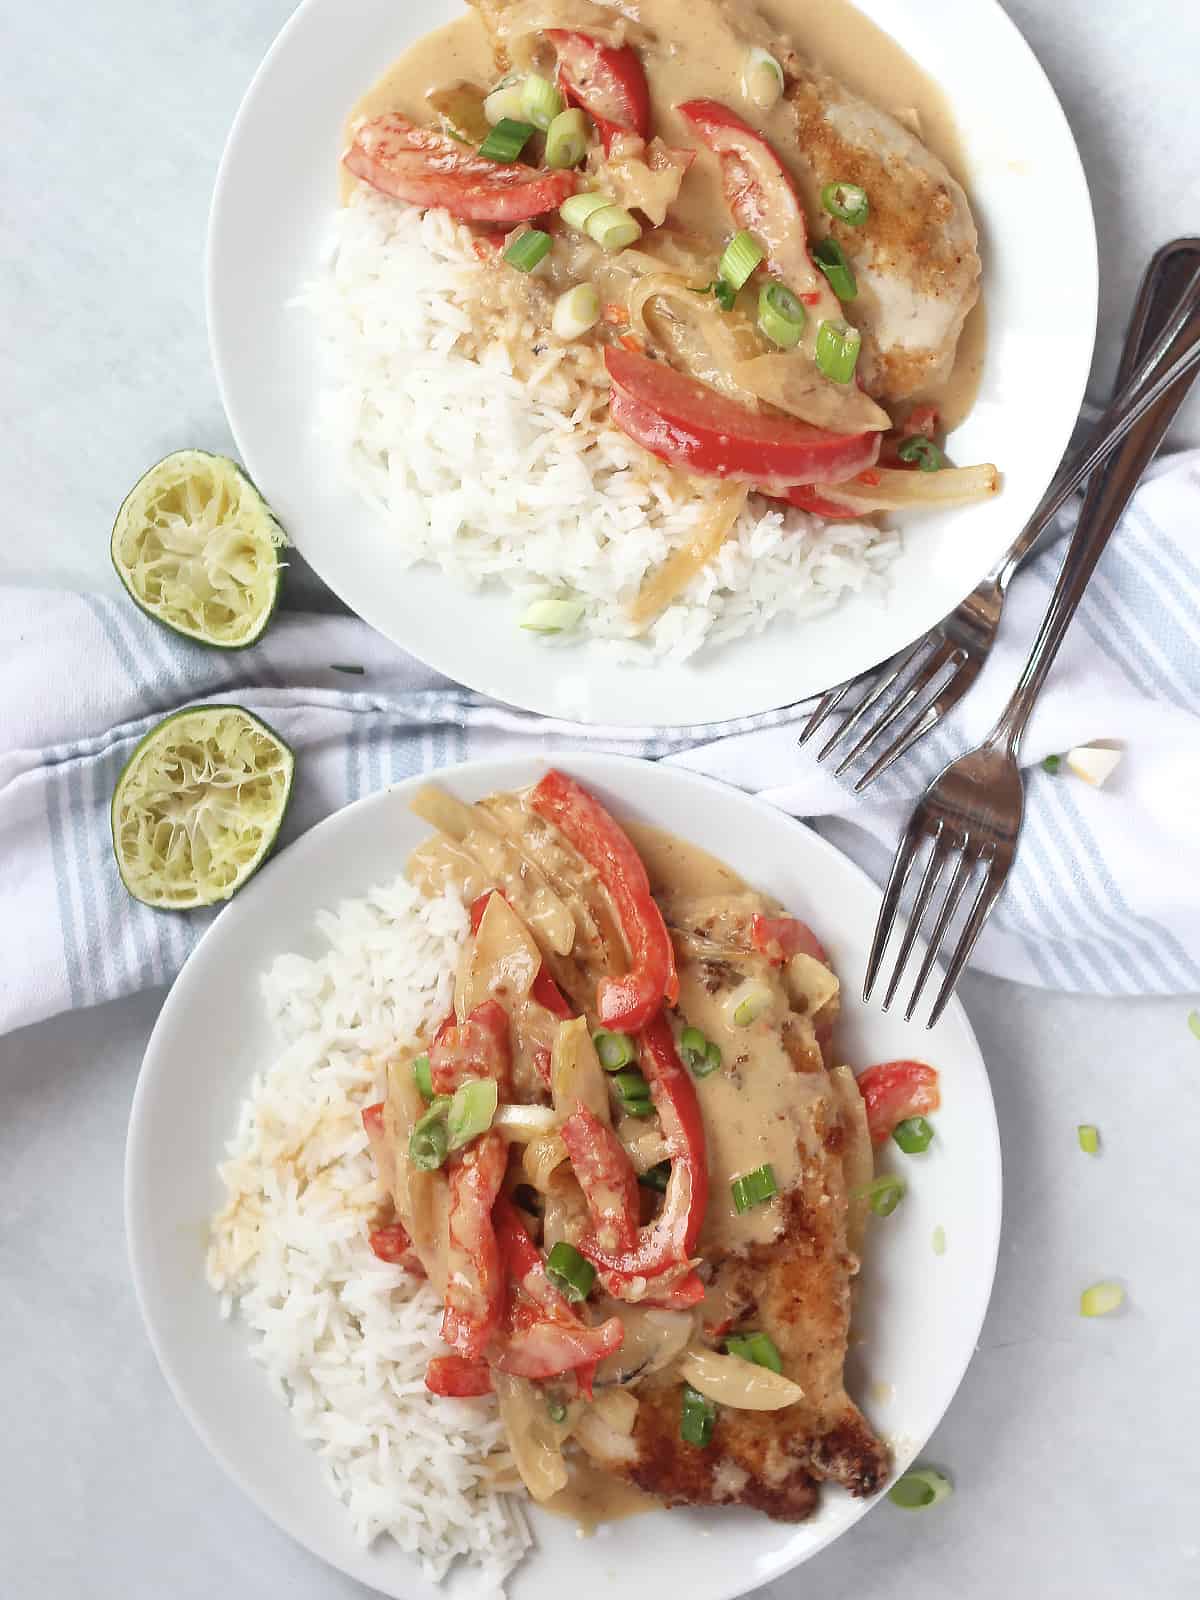 Creamy chicken curry served in two plates with white rice.